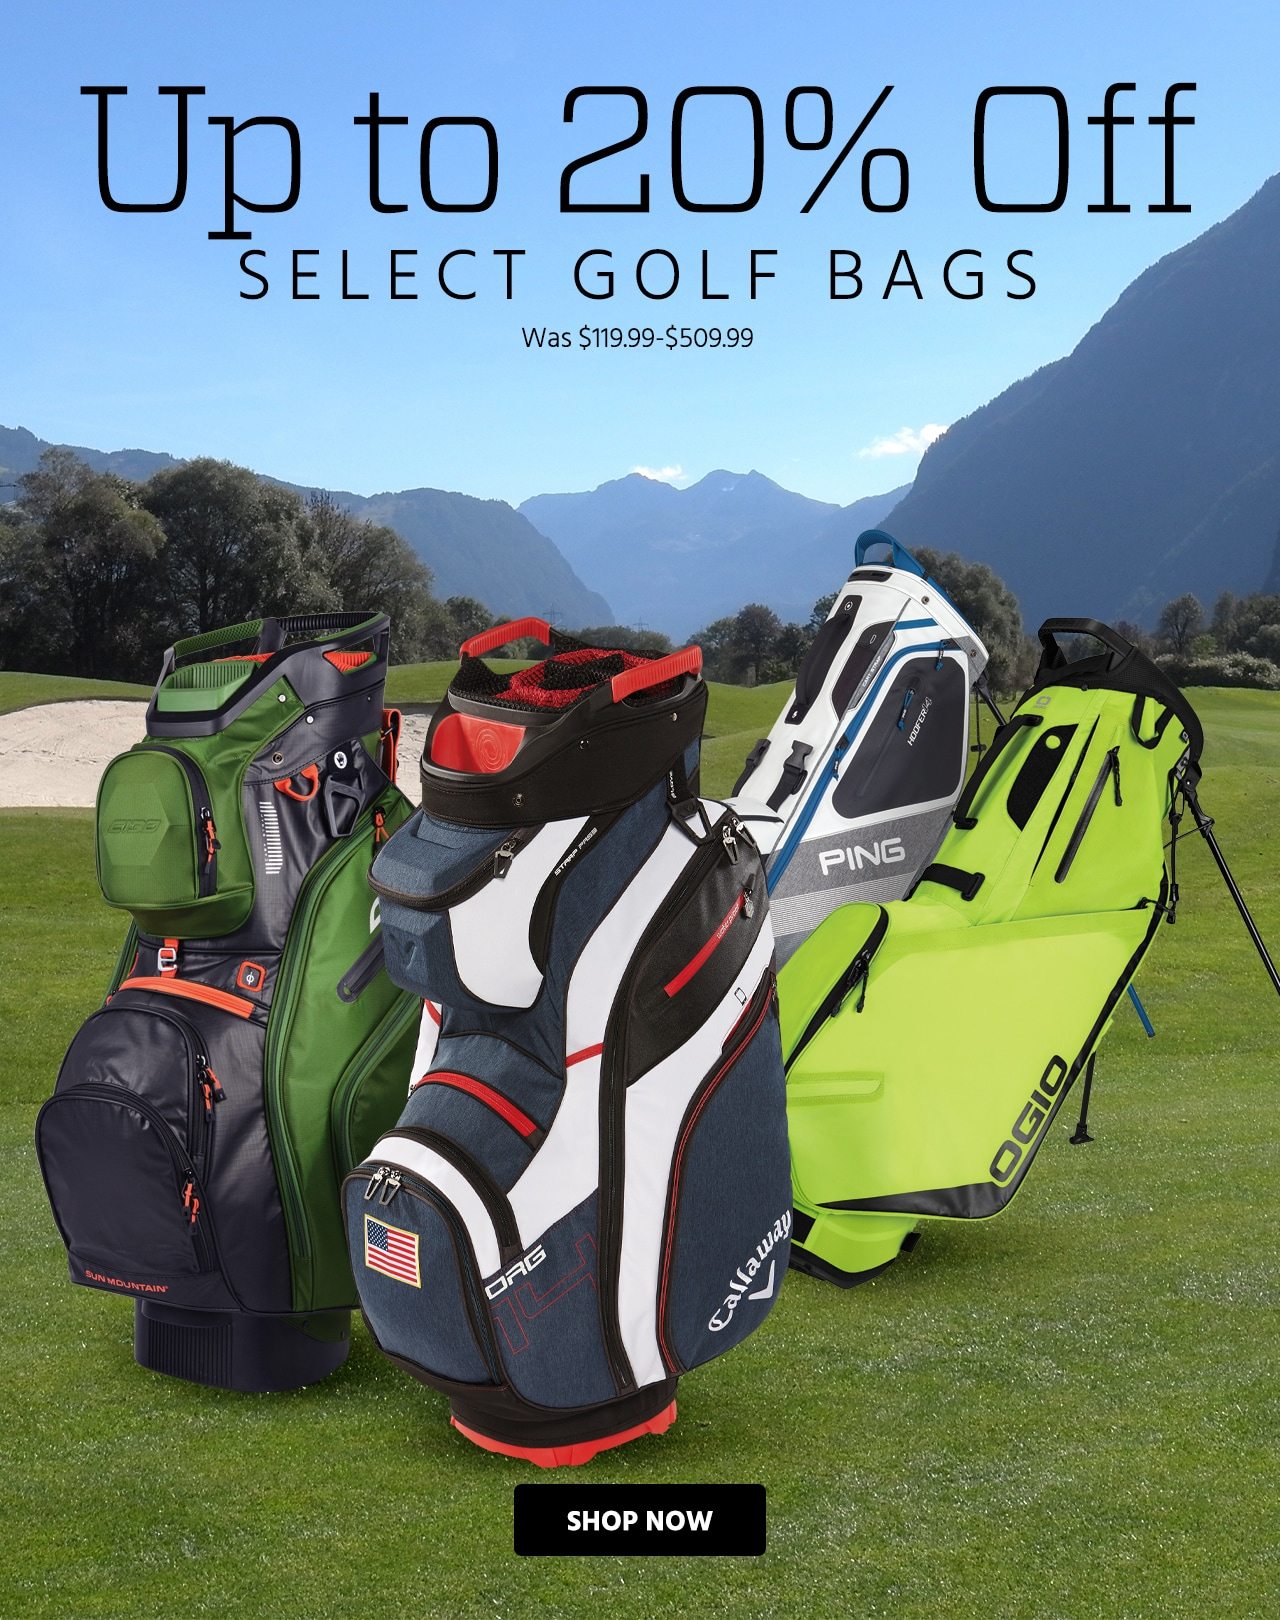 Up to 20% Off Select Golf Bags. Was $119.99 to $509.99. Shop Now.